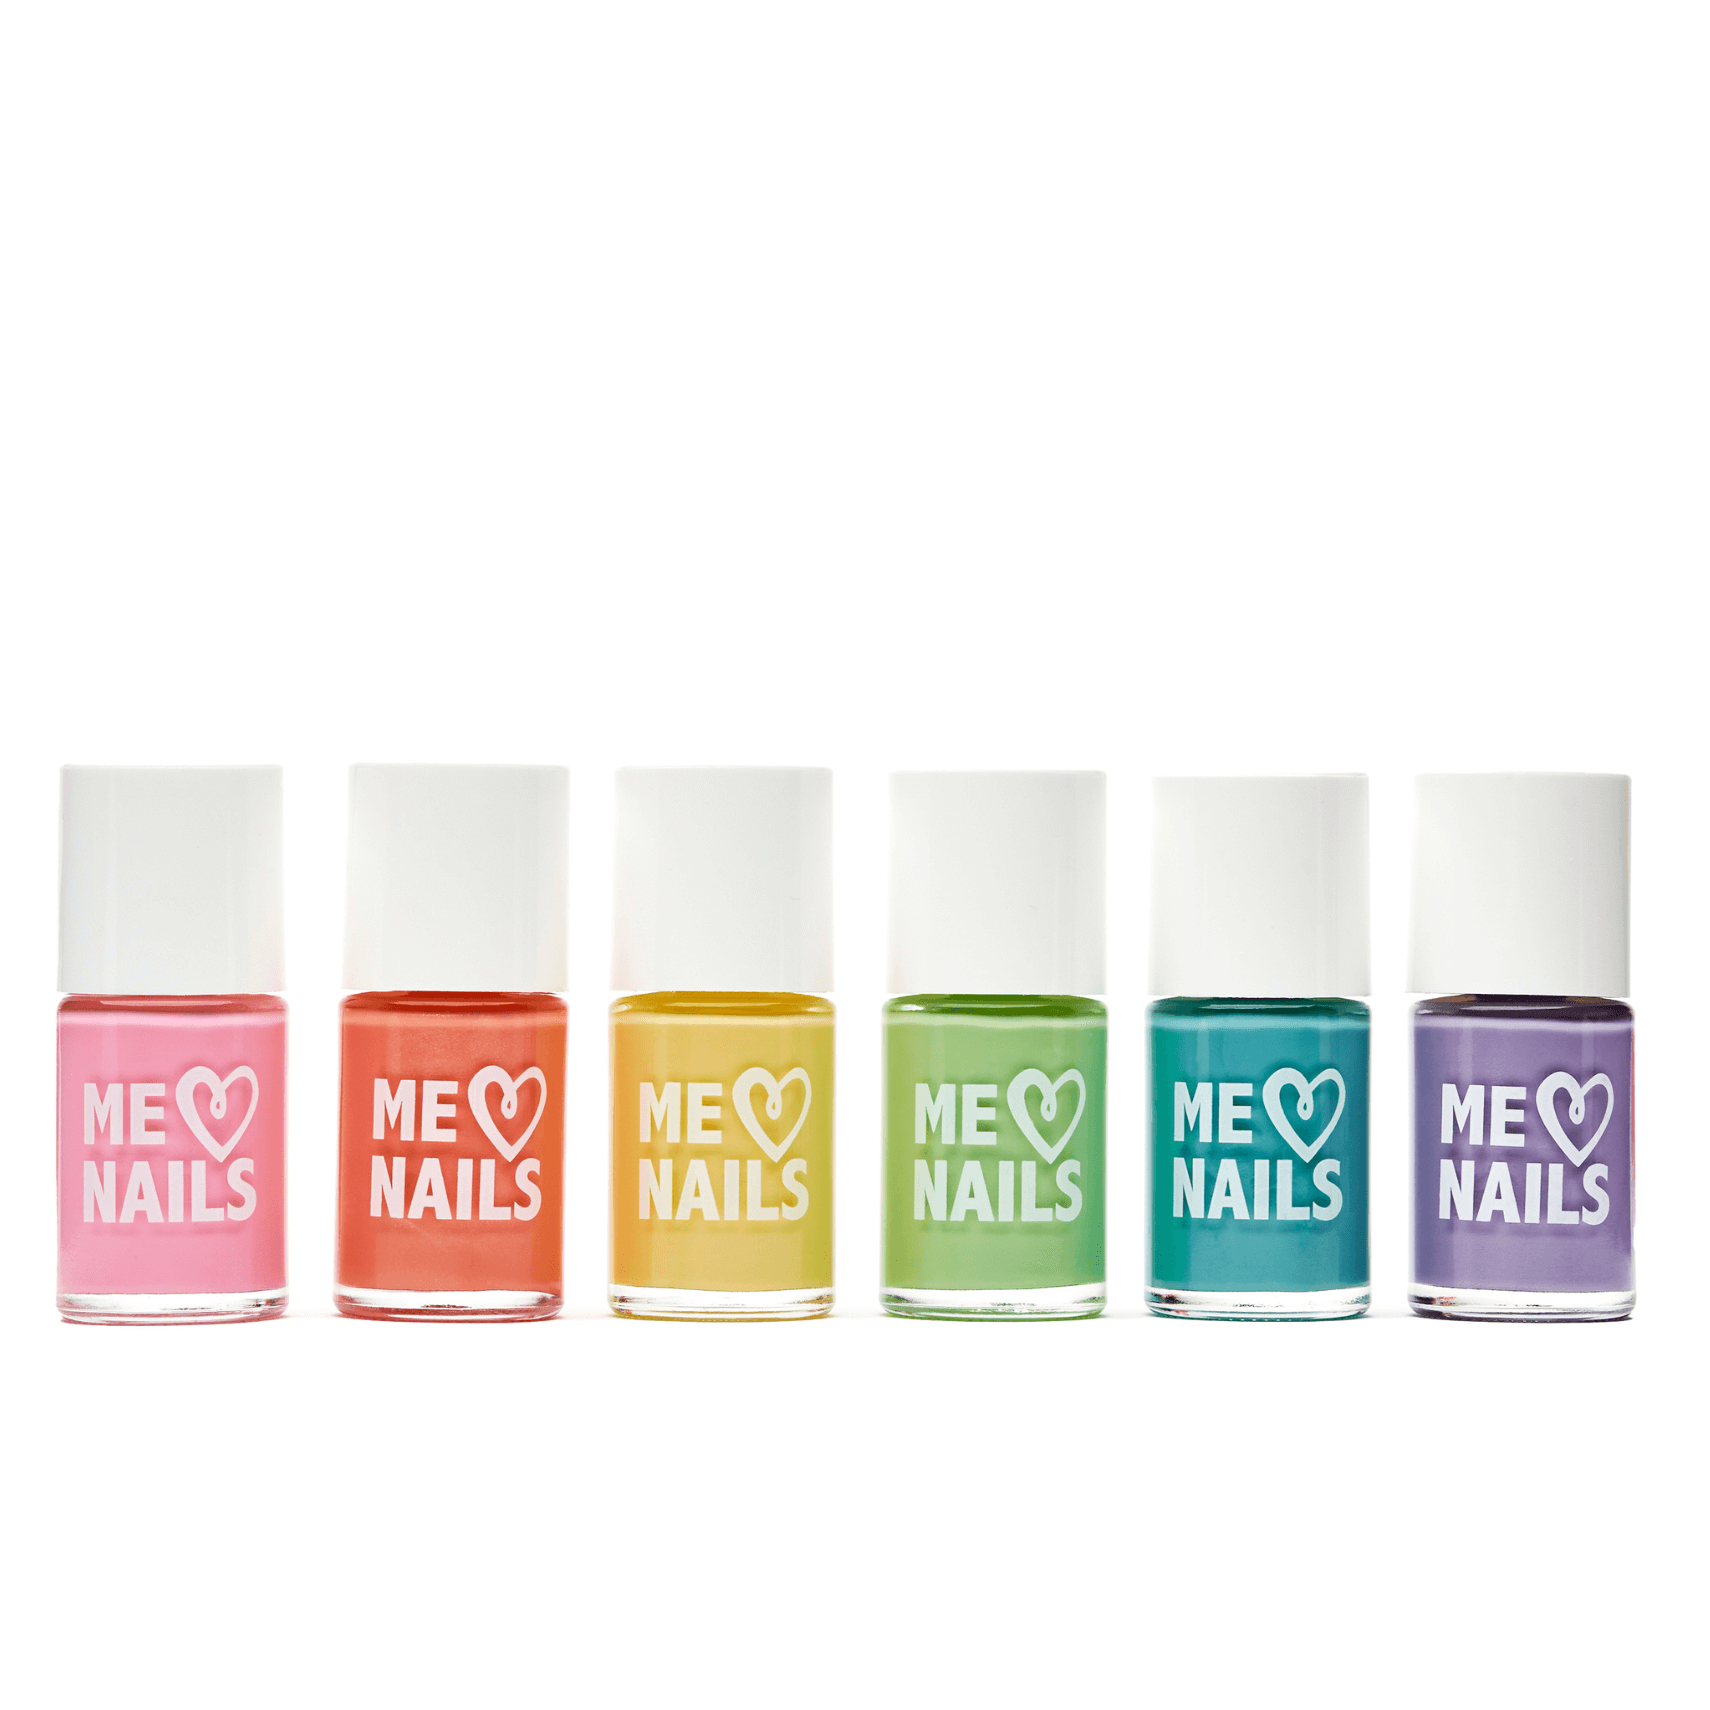 Salon quality nail polish set featuring all the colors of the rainbow.